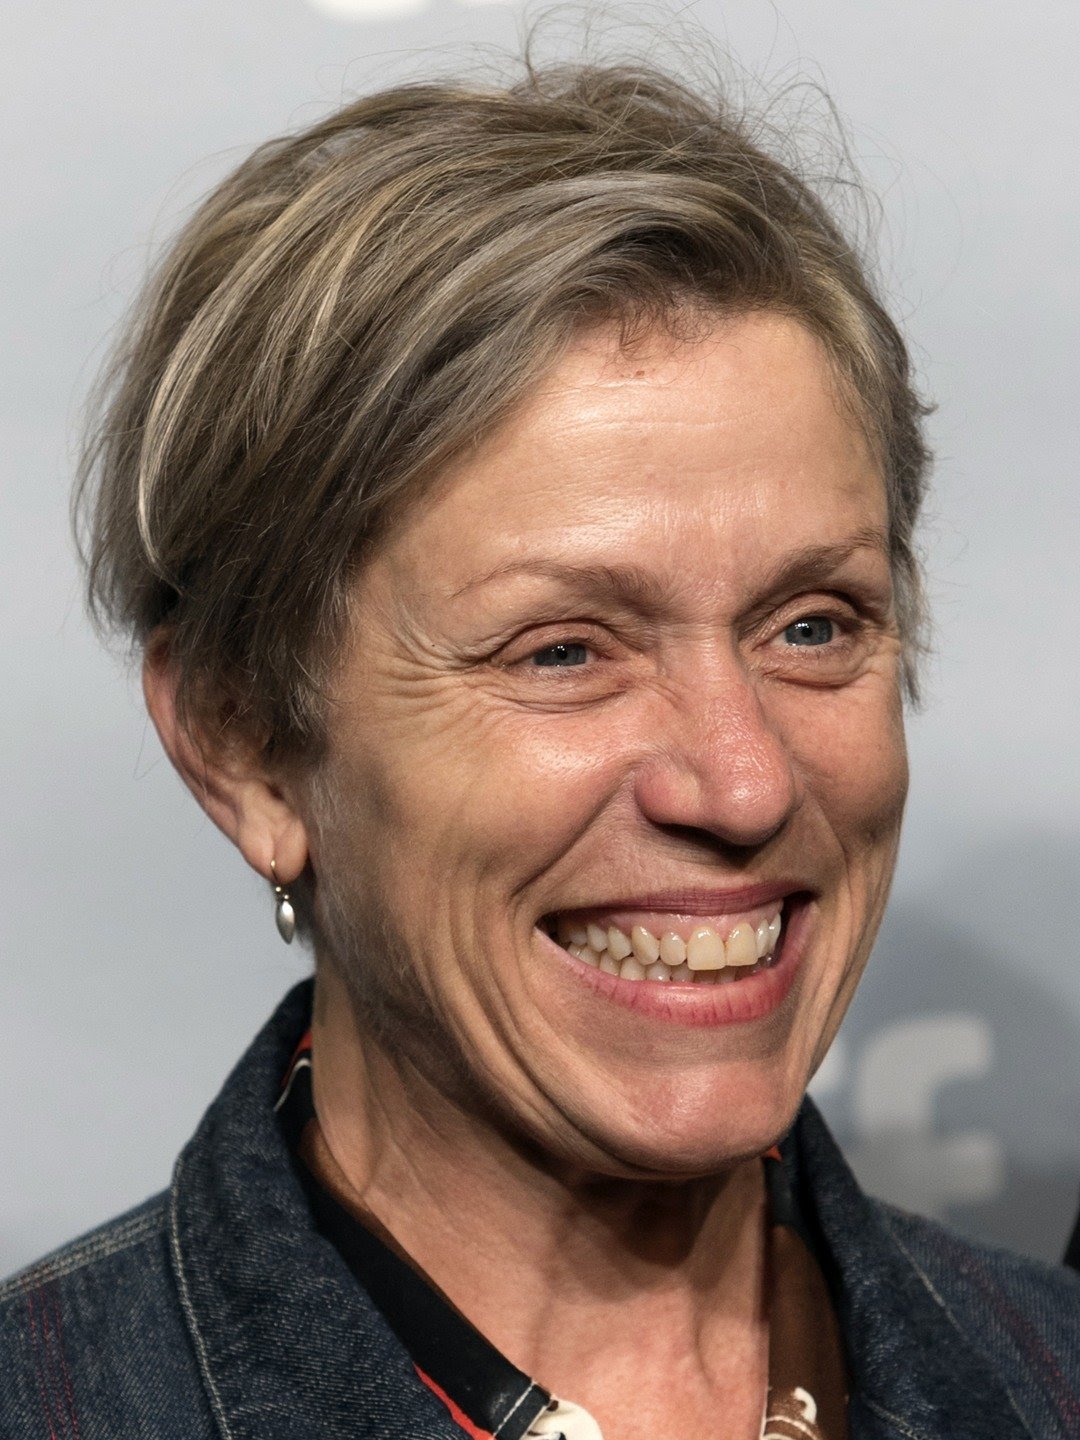 “I sold Frances McDormand petrol when she was on holiday in Scotland and I’d been having a terrible day (customer service is great). I didn’t let on that I knew who she was because I got the feeling she didn’t want to be interrupted, but she was so nice to me and told me to have a lovely day. She cheered me up after endless horrible customers.”